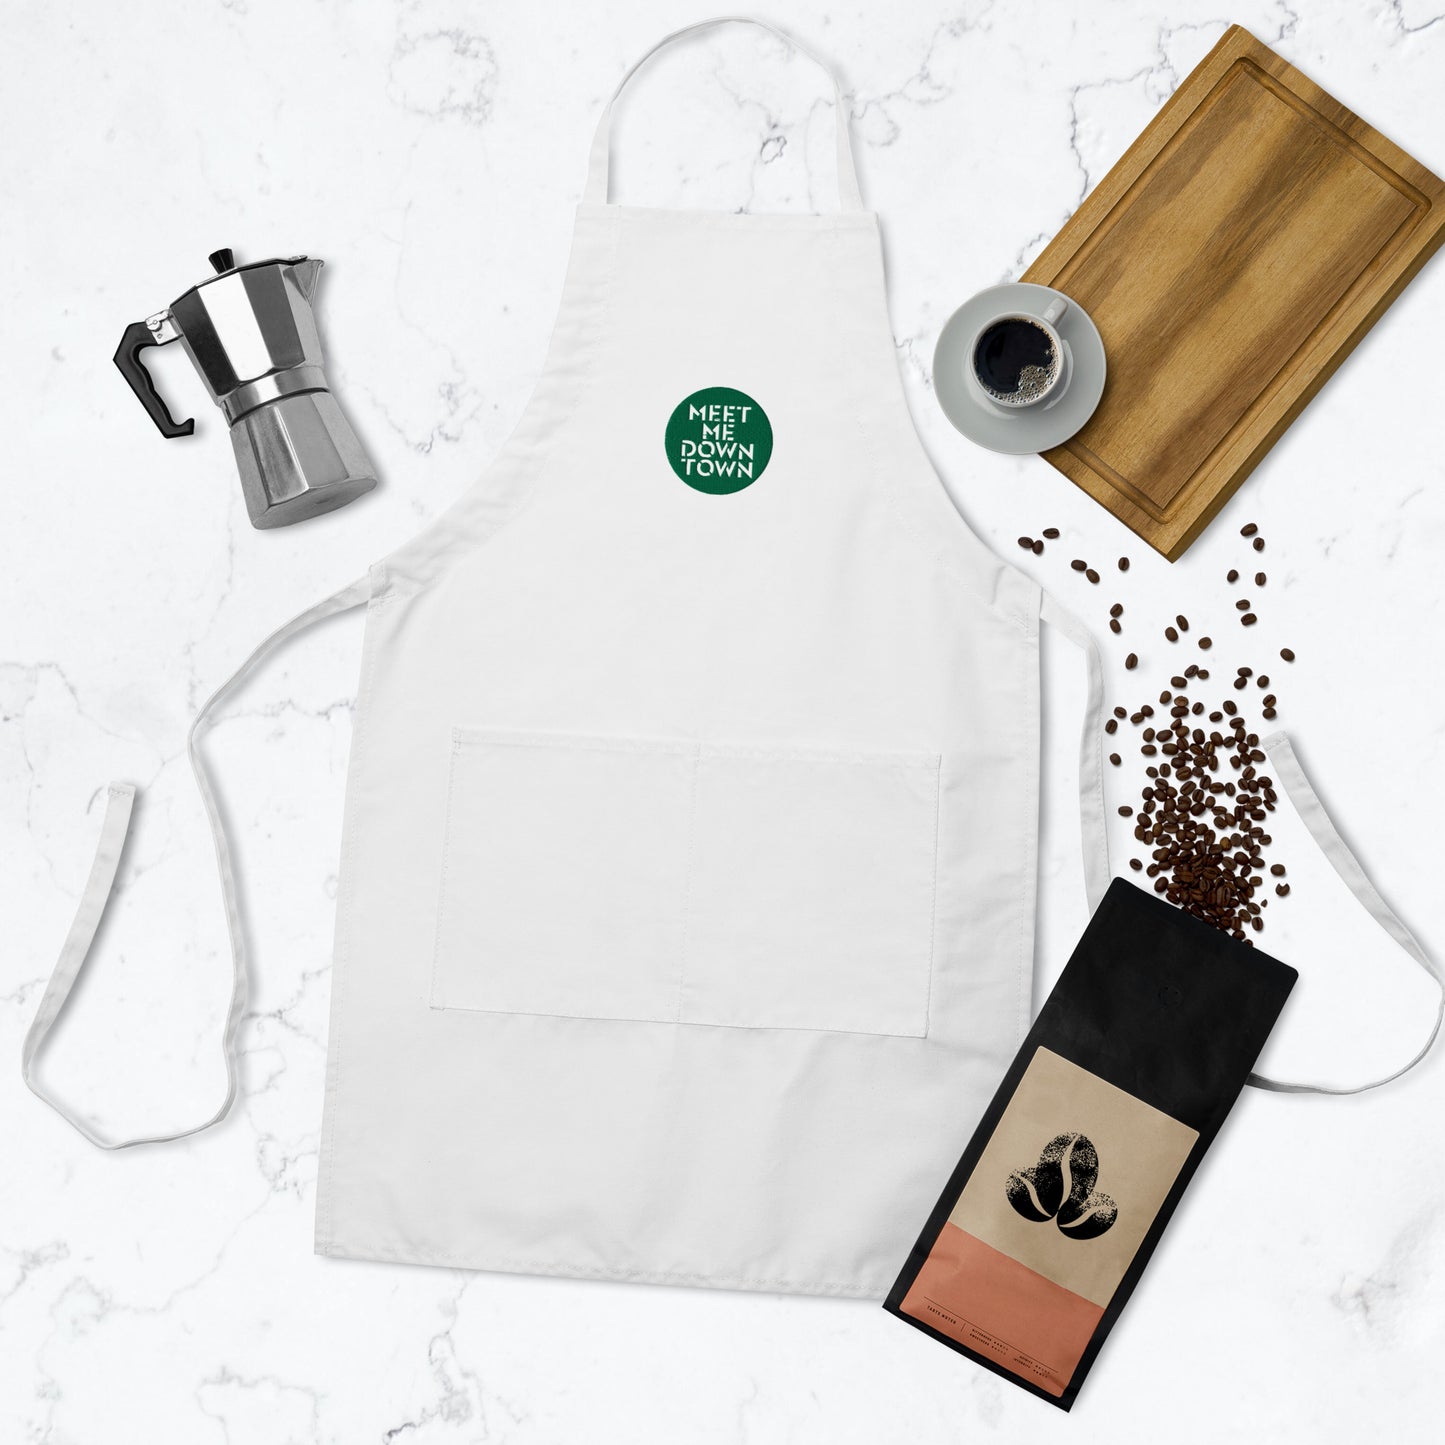 "Meet Me Downtown" (Green) Embroidered Apron